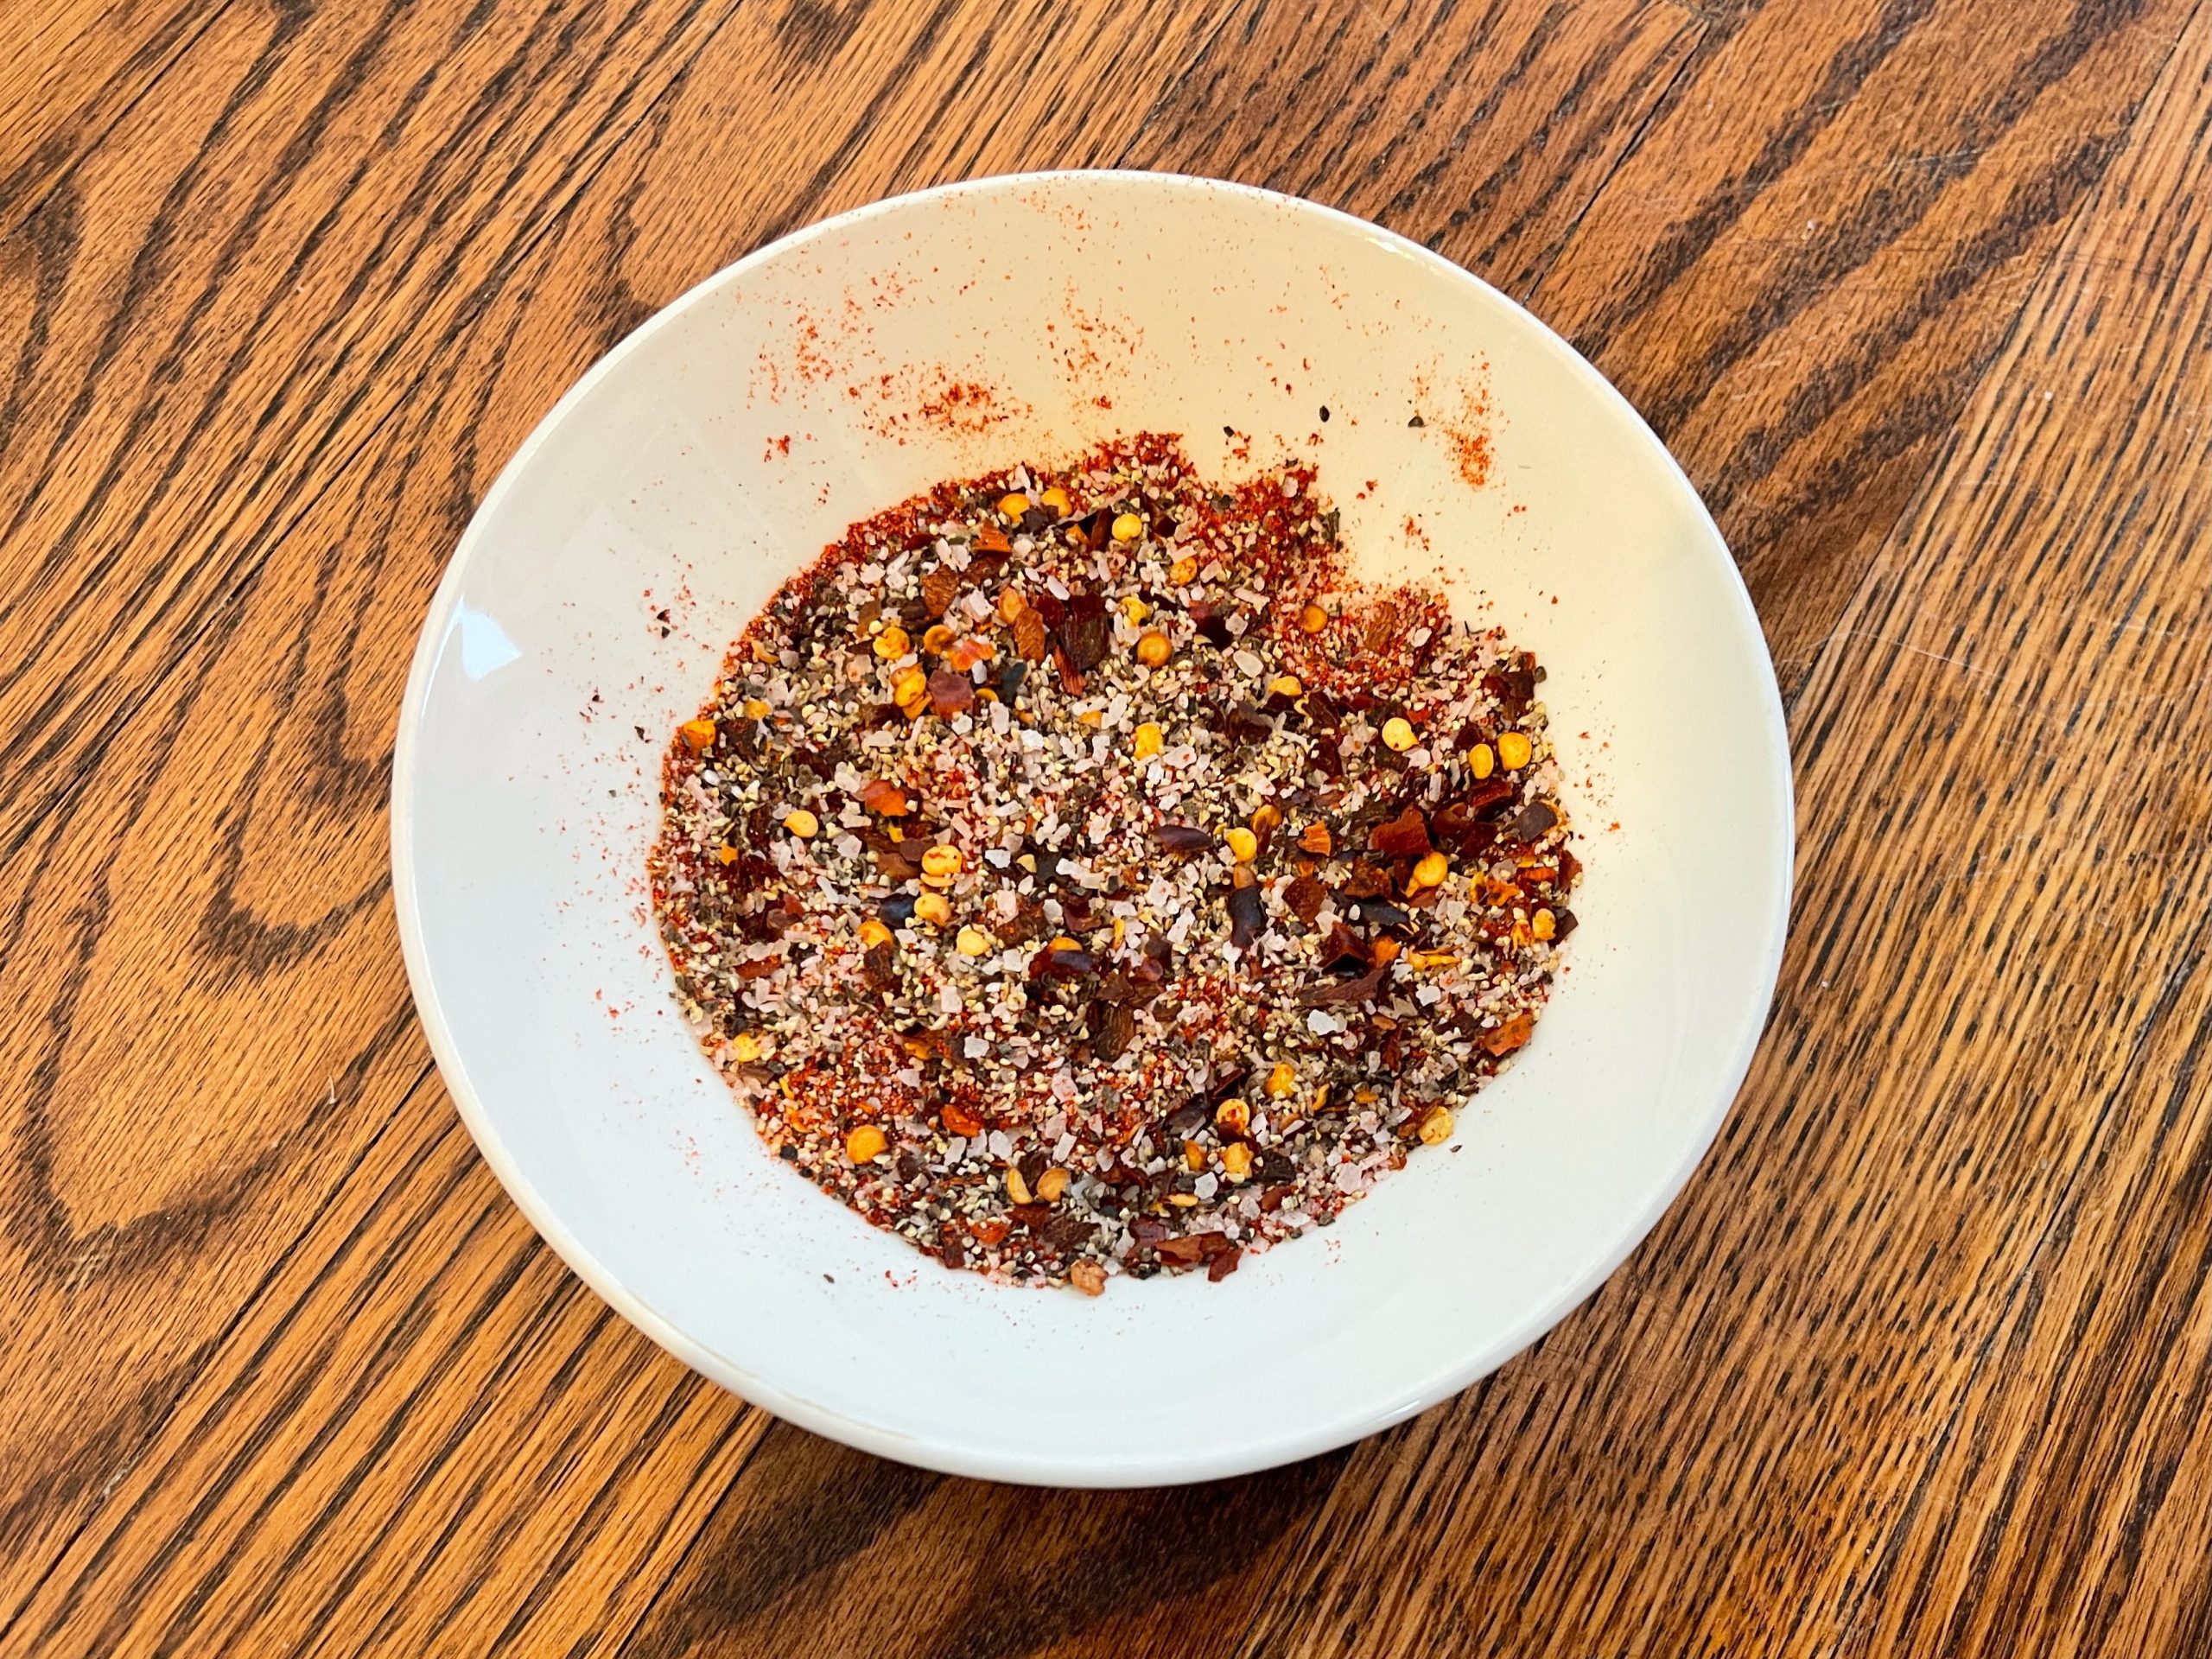 make the dry rub by mixing together the black pepper, kosher salt, paprika, and red pepper flakes together